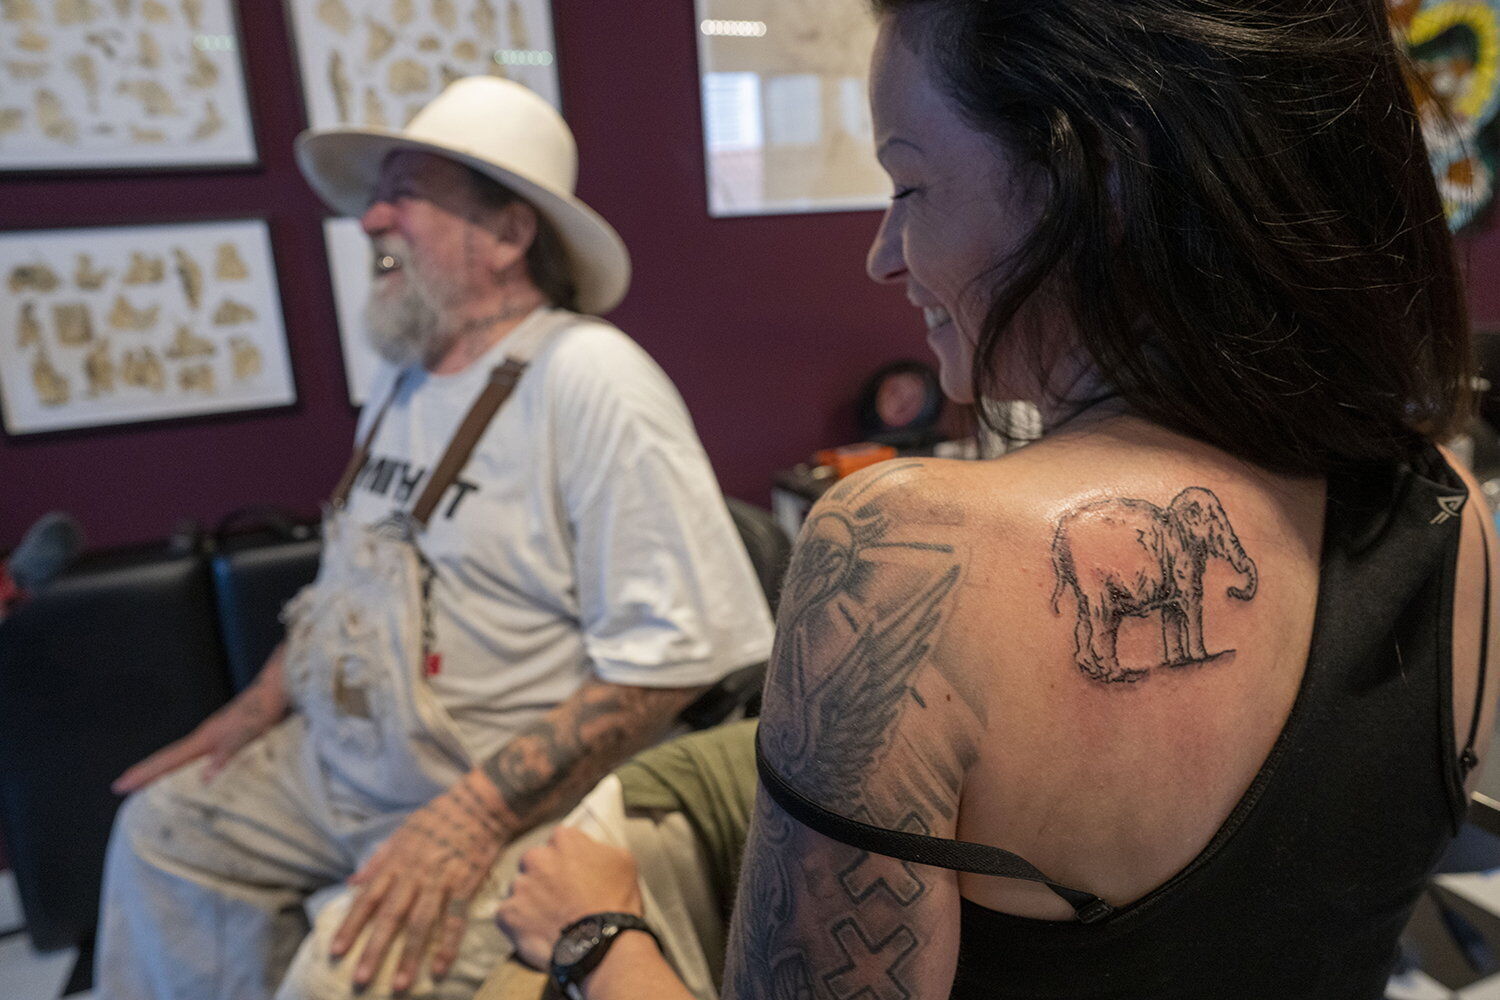 Rembrandt House tattoo shop open for business, and sold out - DutchNews.nl